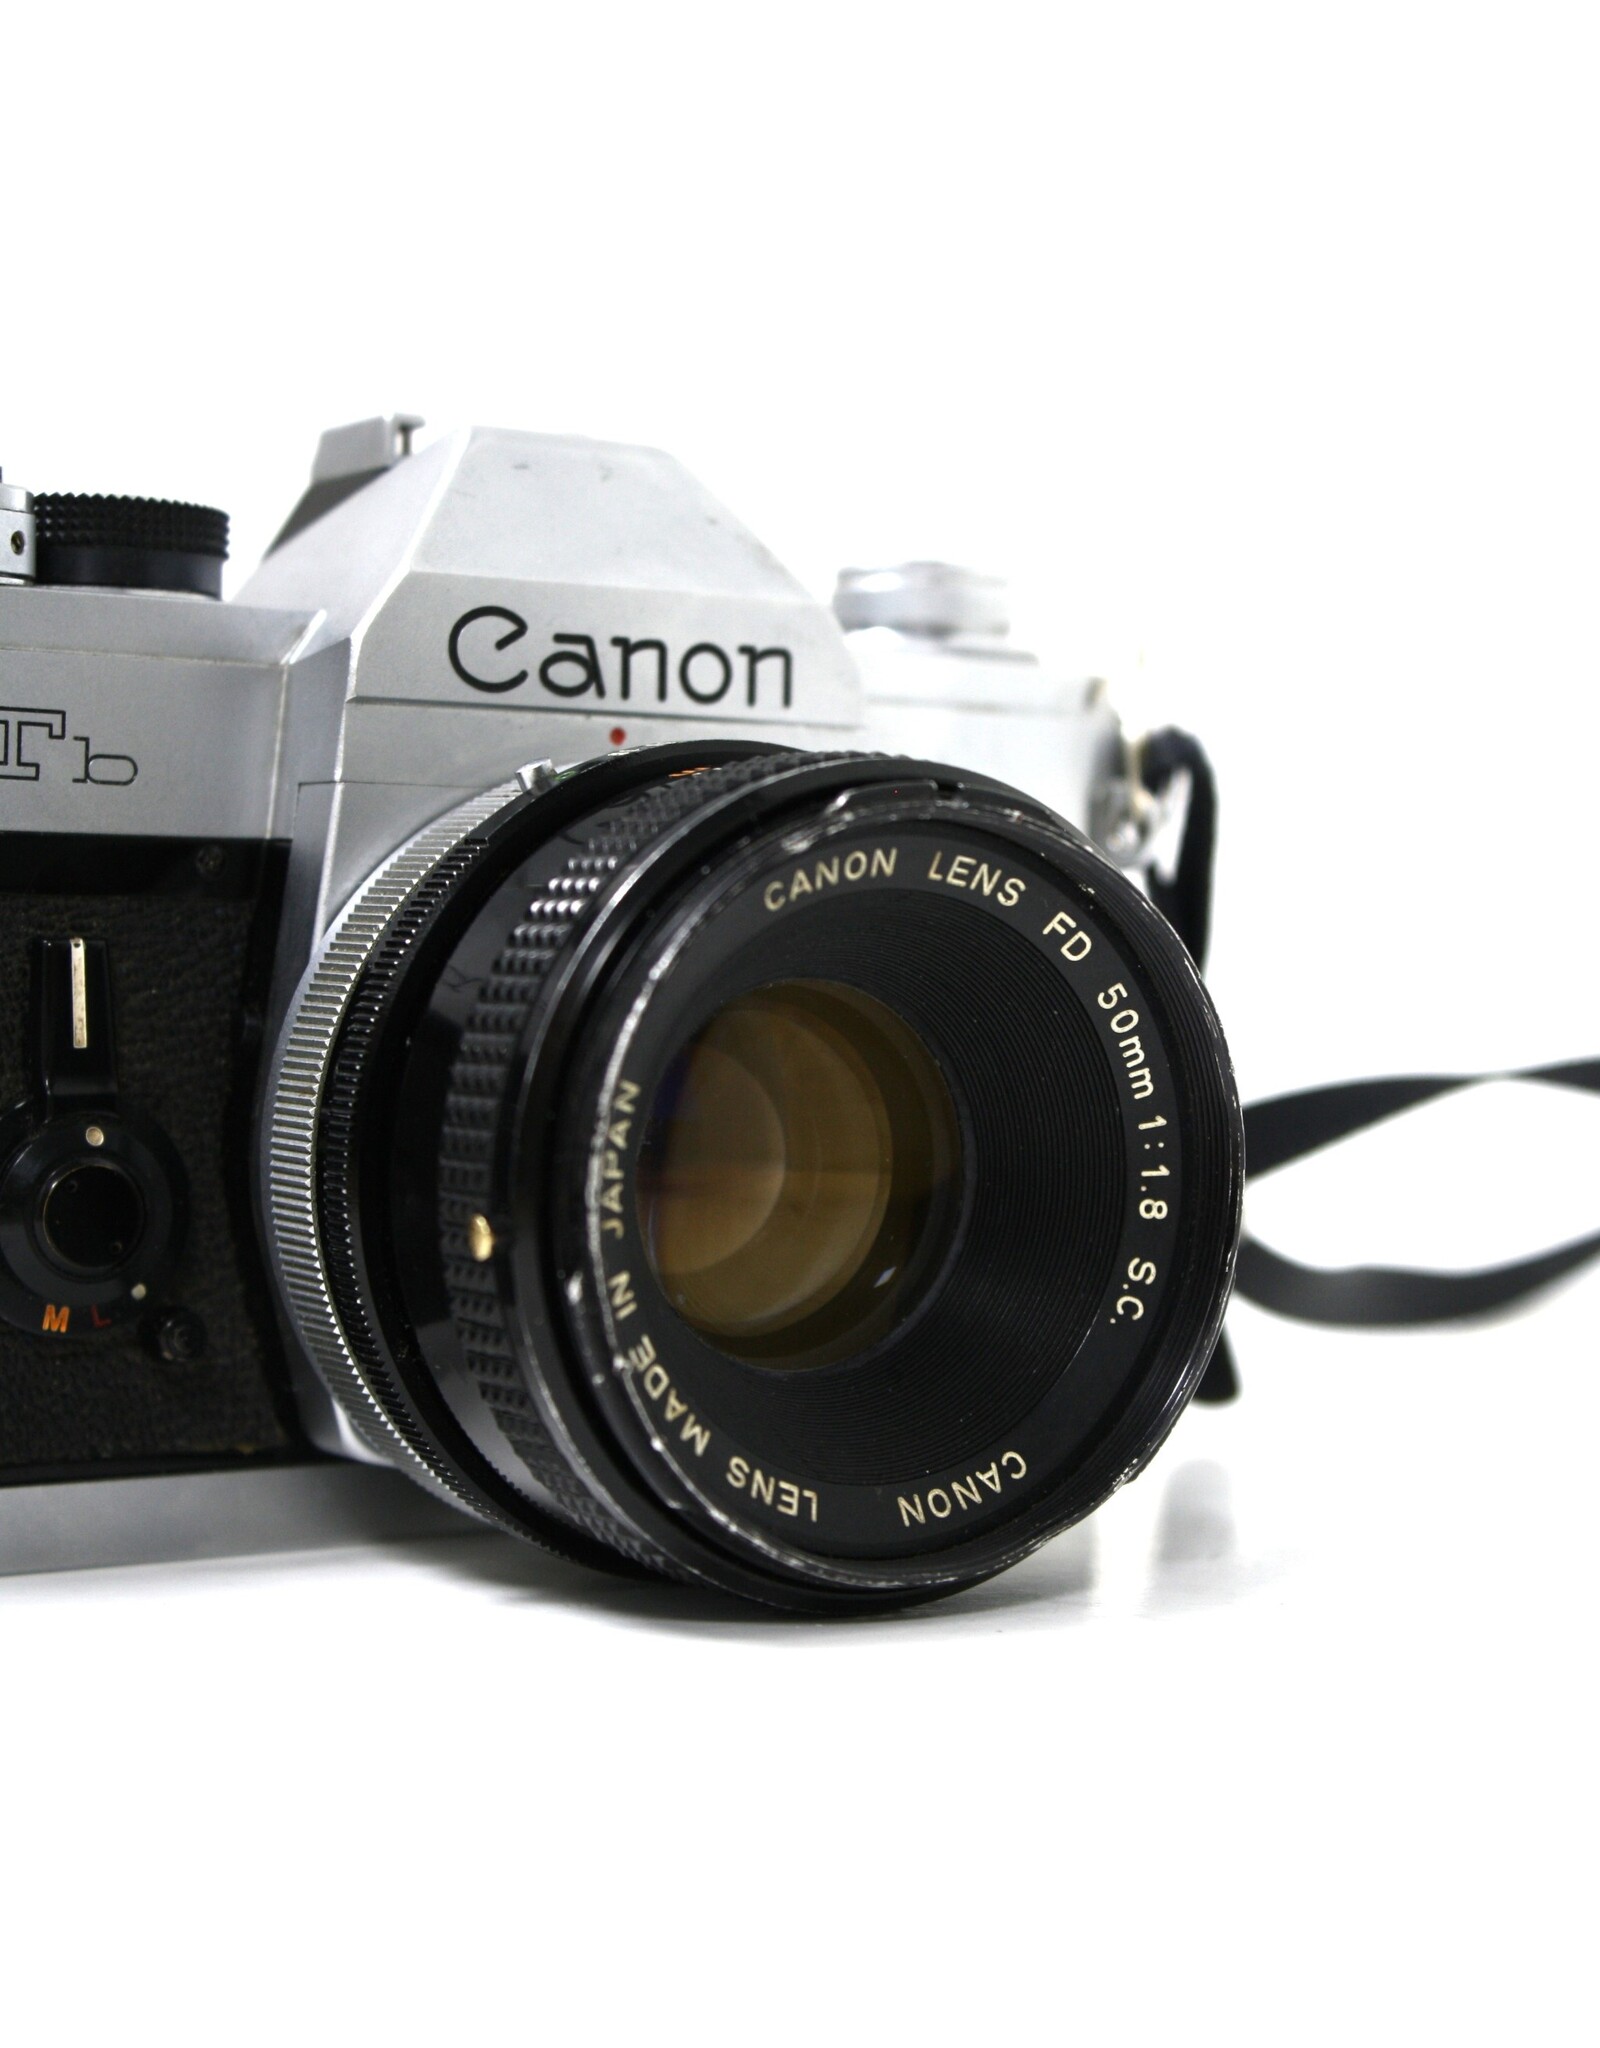 Canon FTb with 50mm lens (PRE-OWNED)